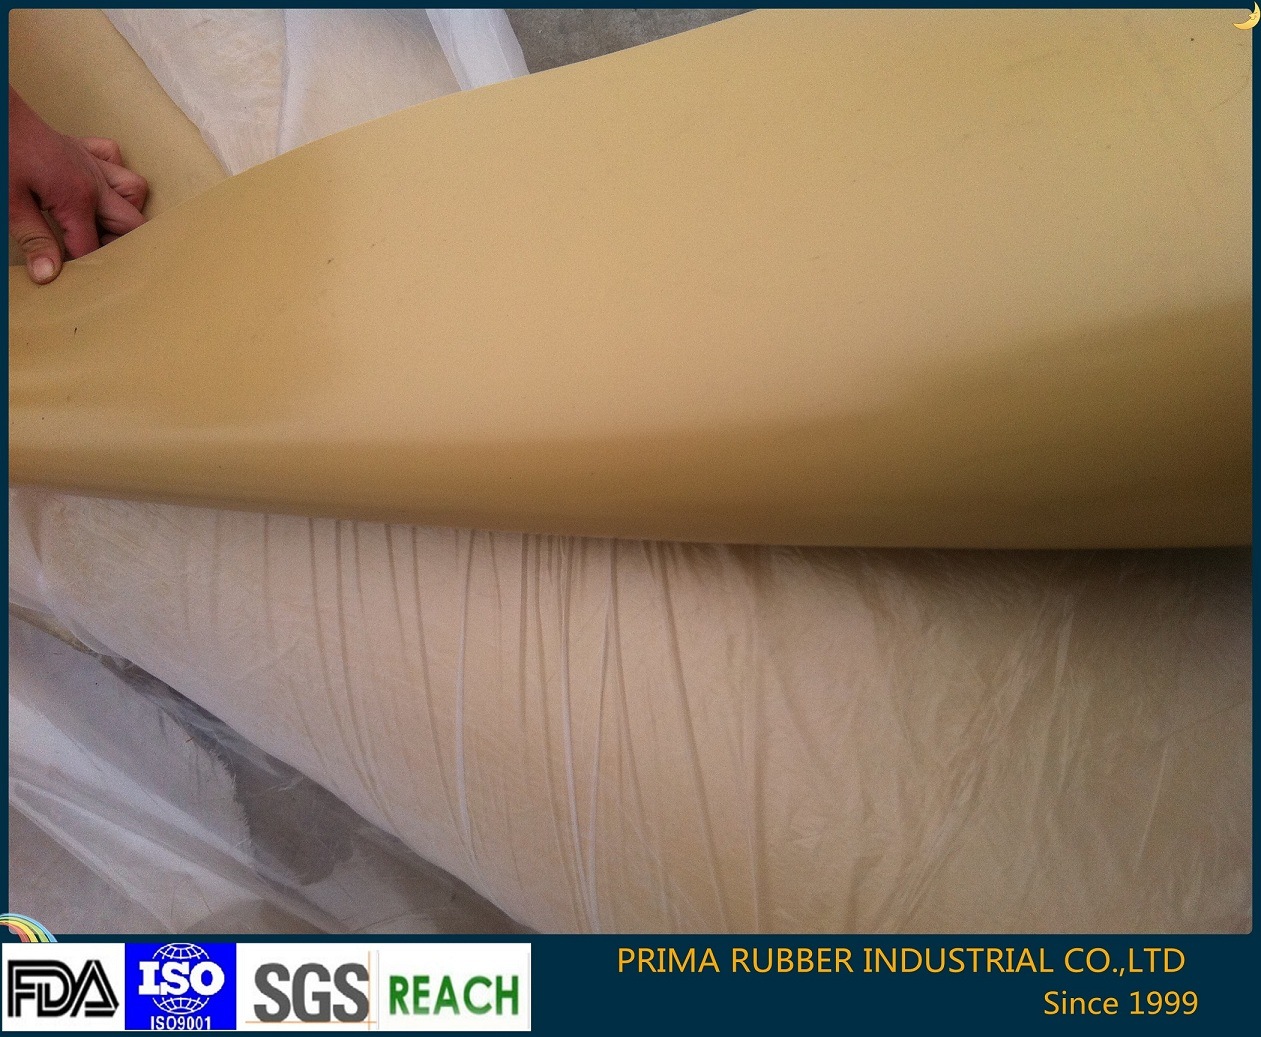 Professional Production Manufacturer of Rubber Products